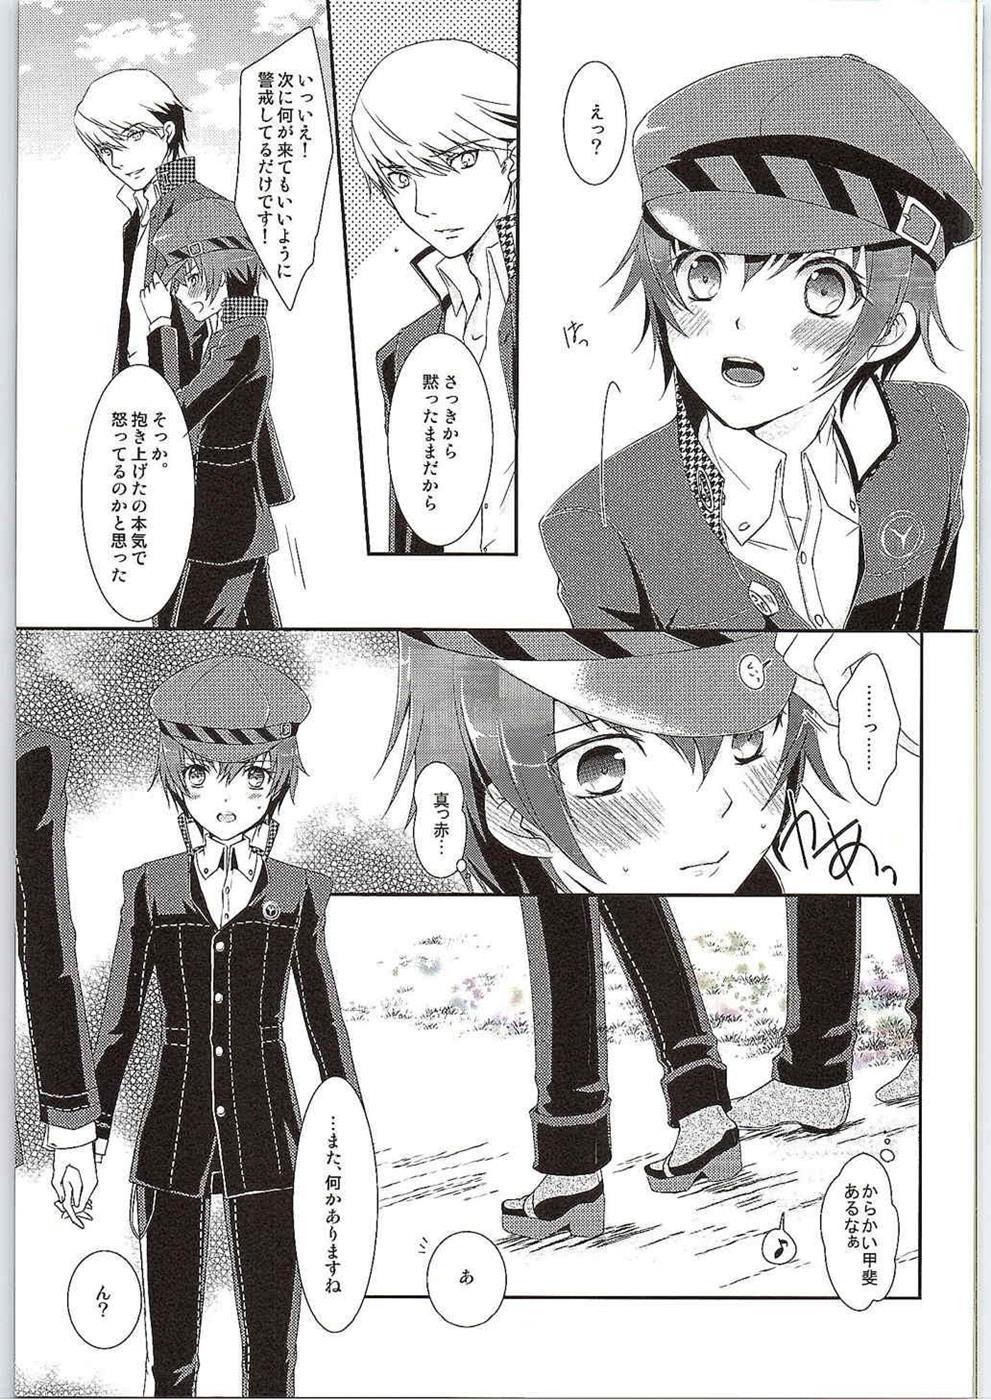 Xxx Hyperbolic Lover - Persona 4 Cut - Page 4